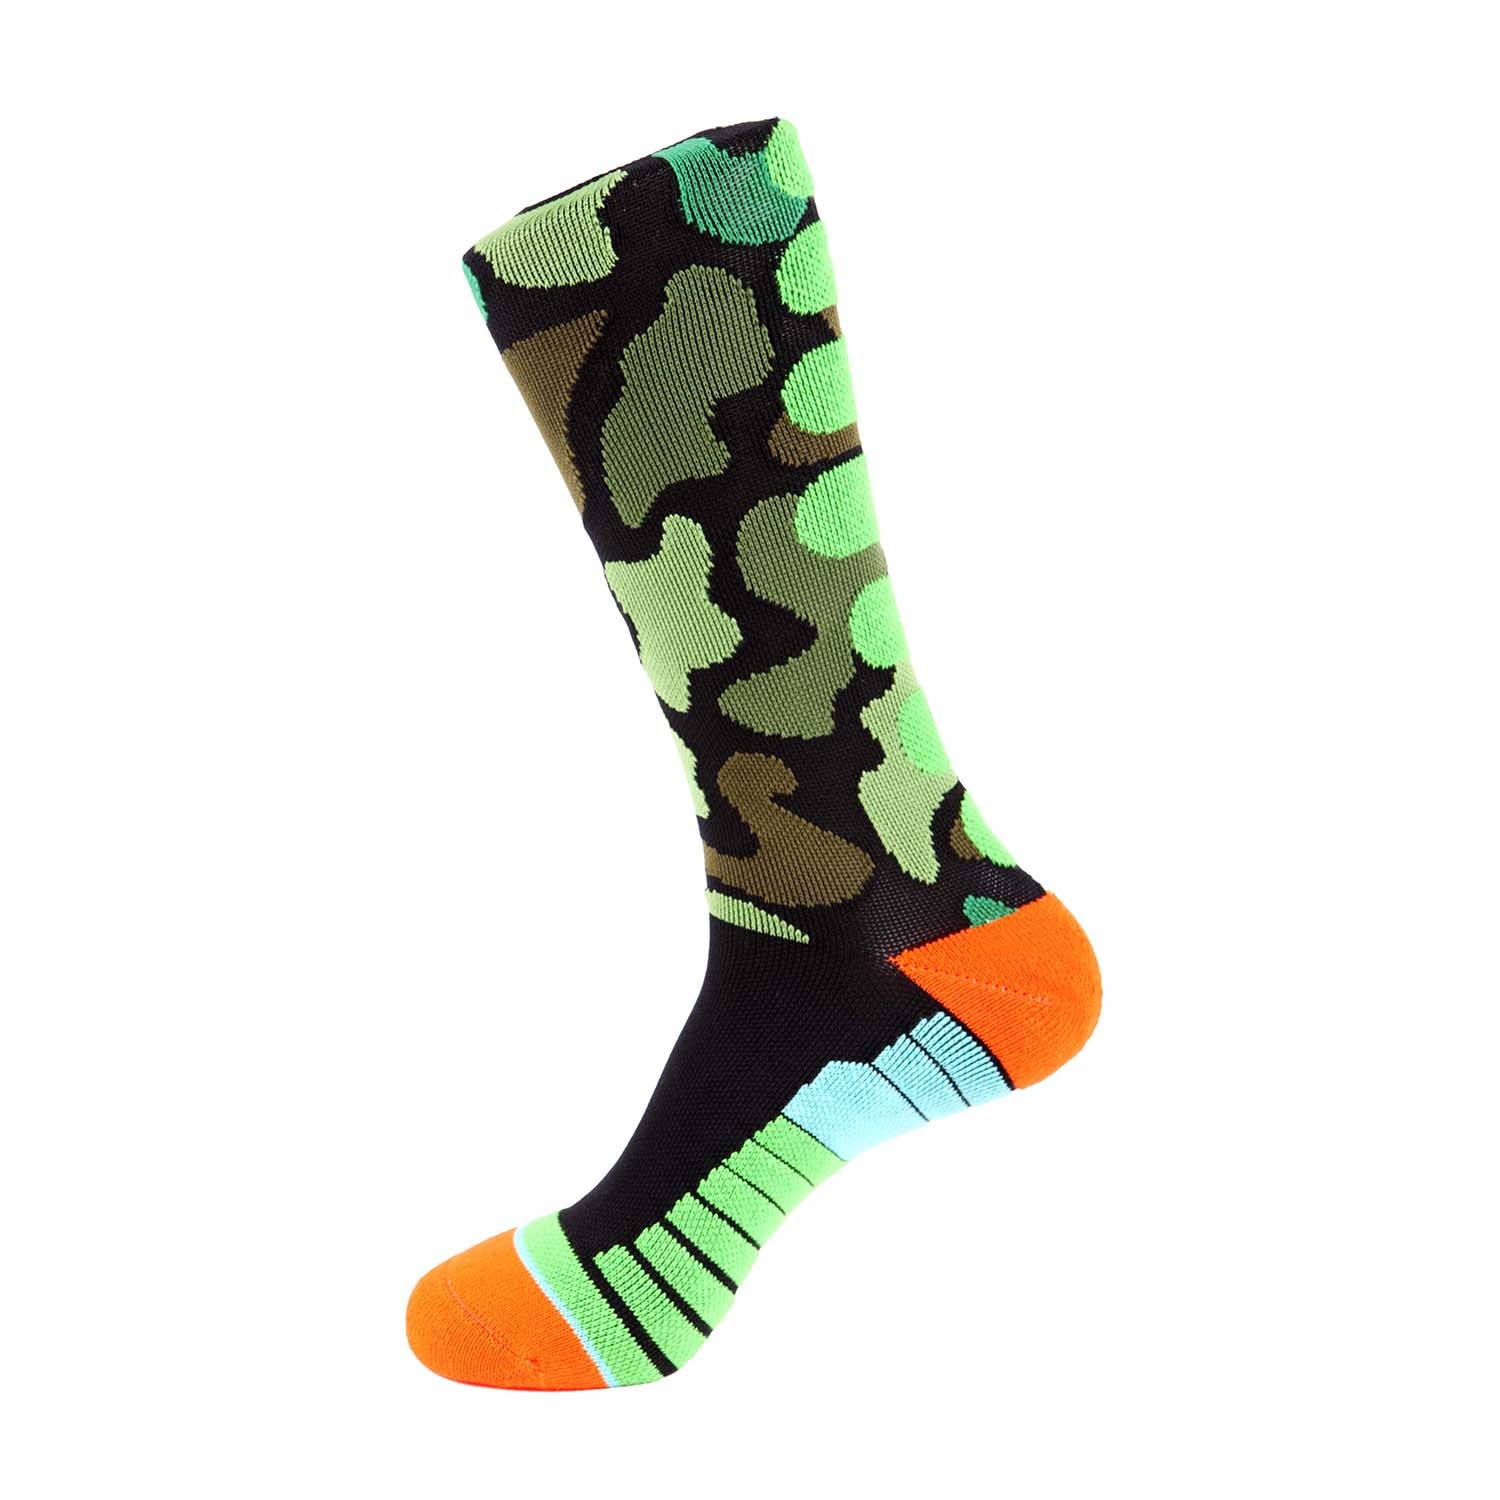 Camo Athletic Socks // Black Multi - Unsimply Stitched - Touch of Modern